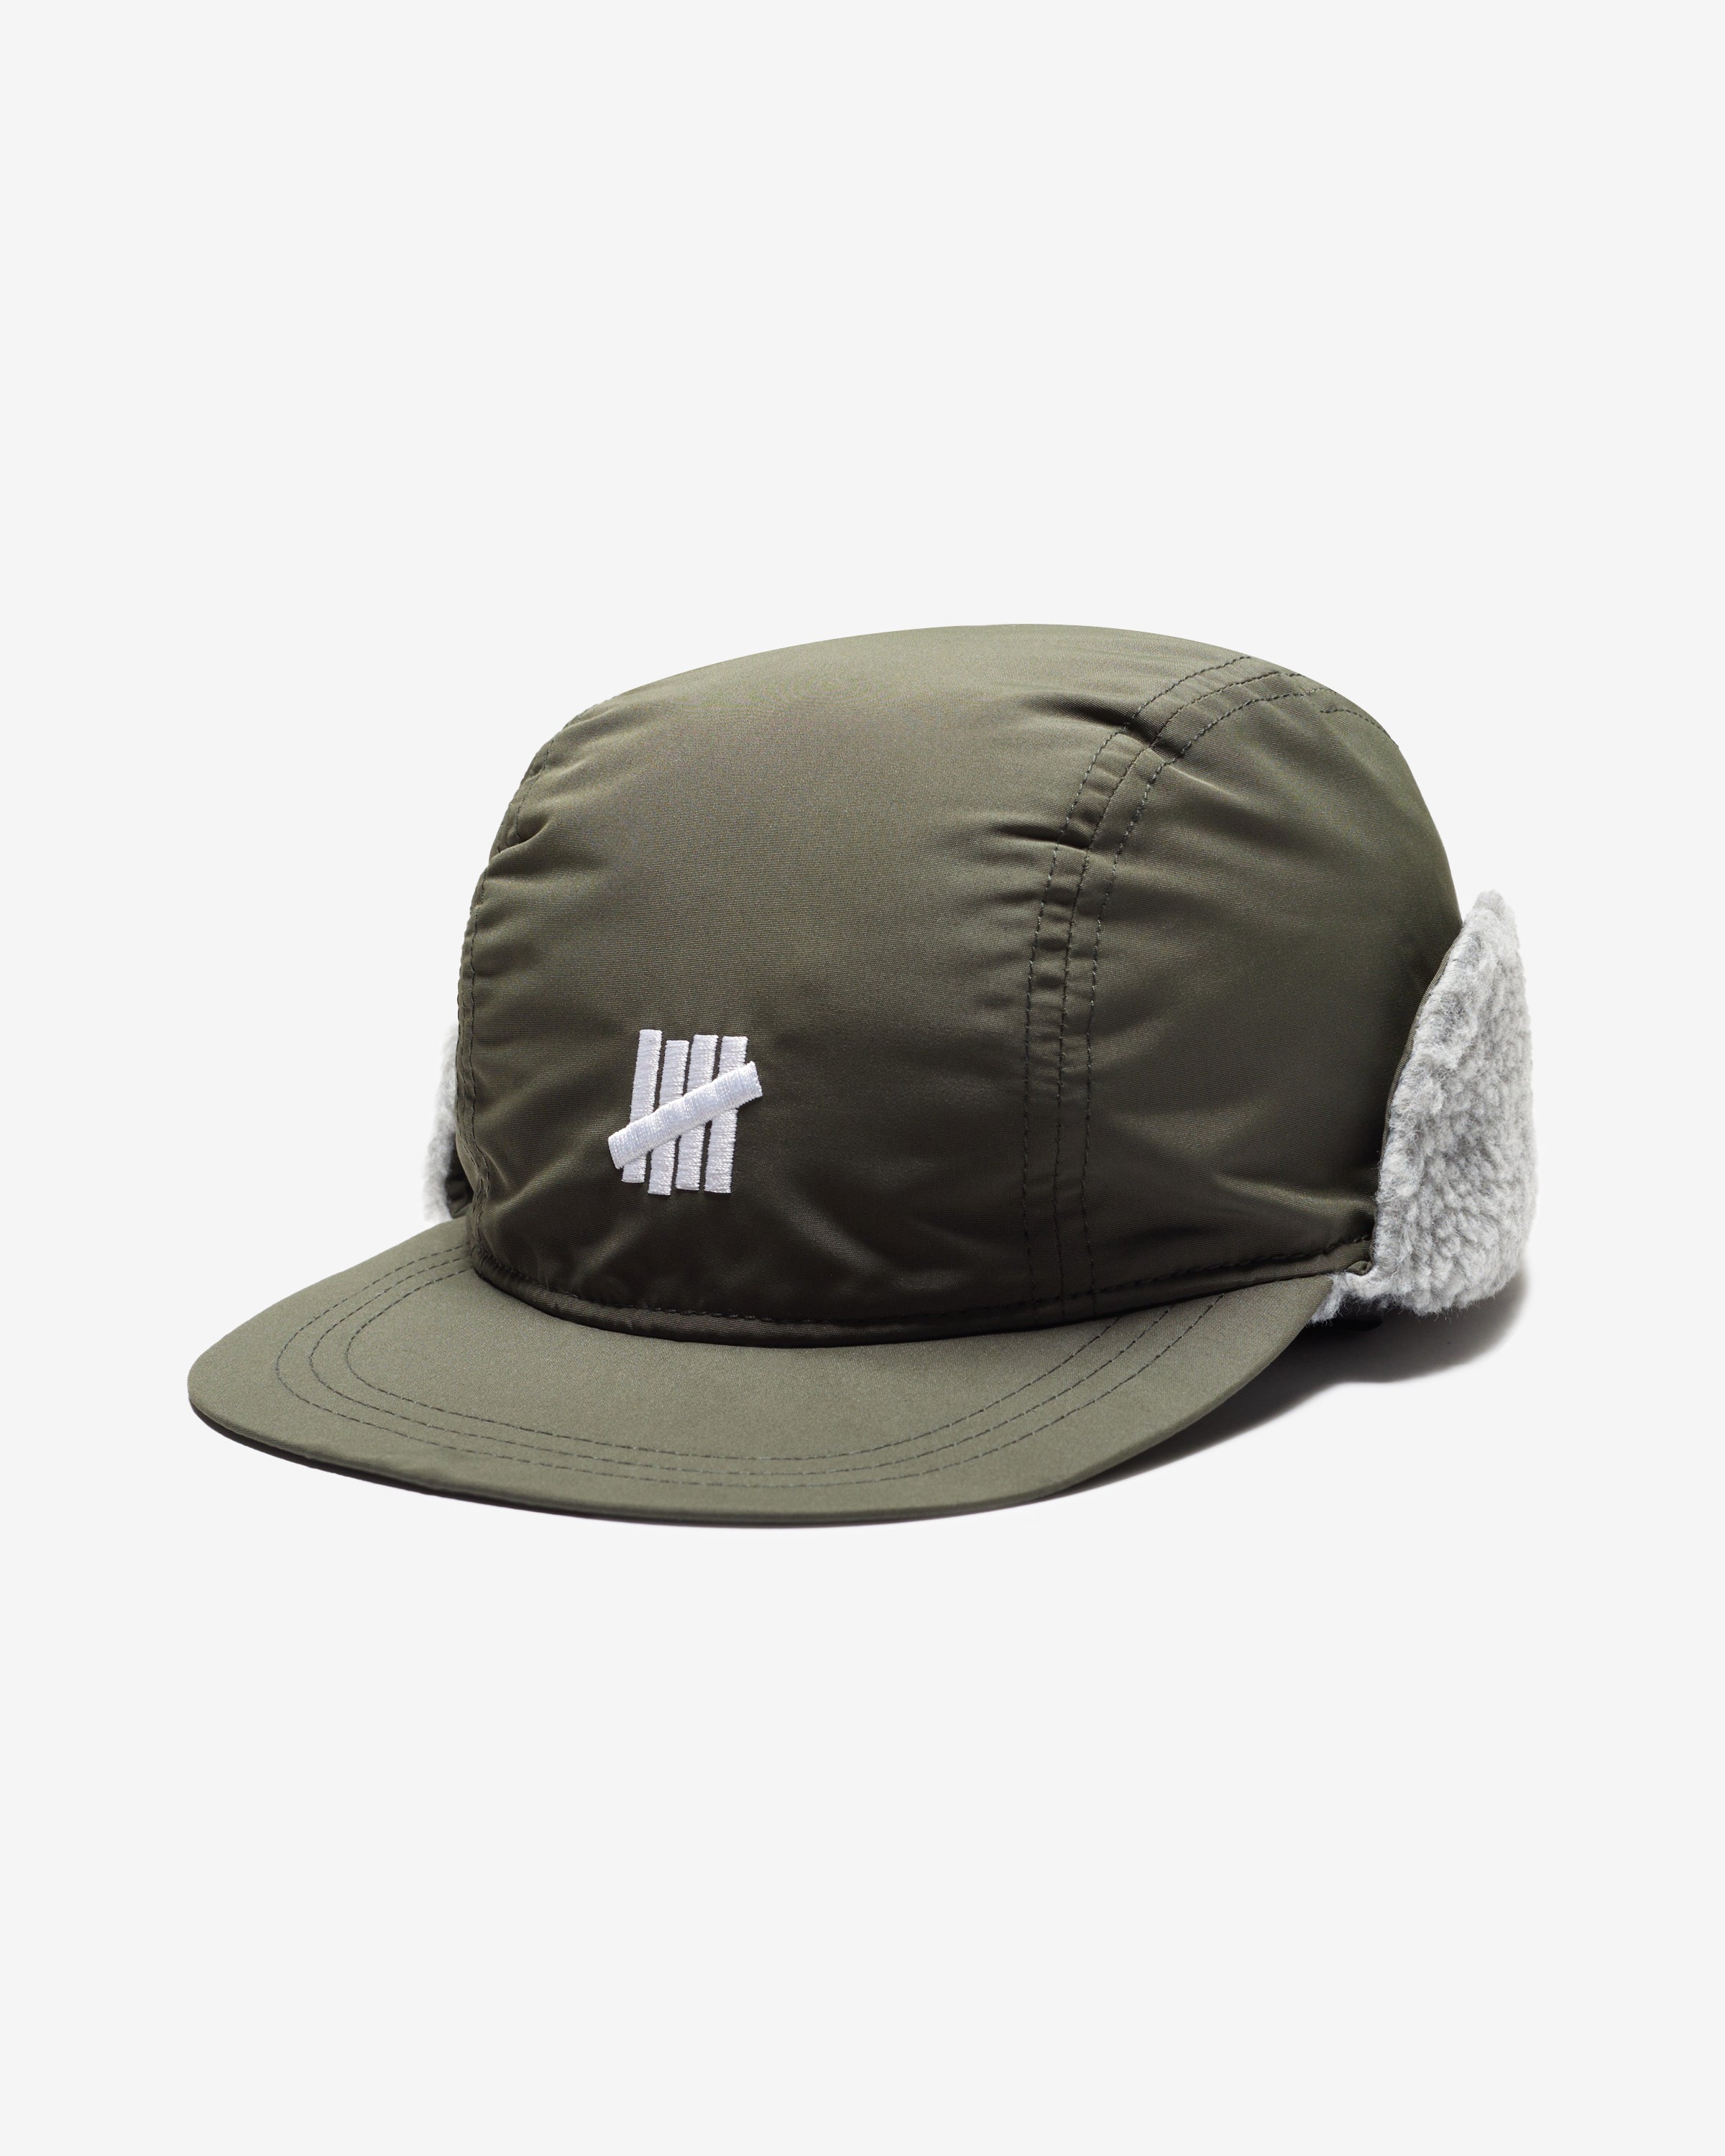 UNDEFEATED ICON WINTER CAP – UNDEFEATED JAPAN